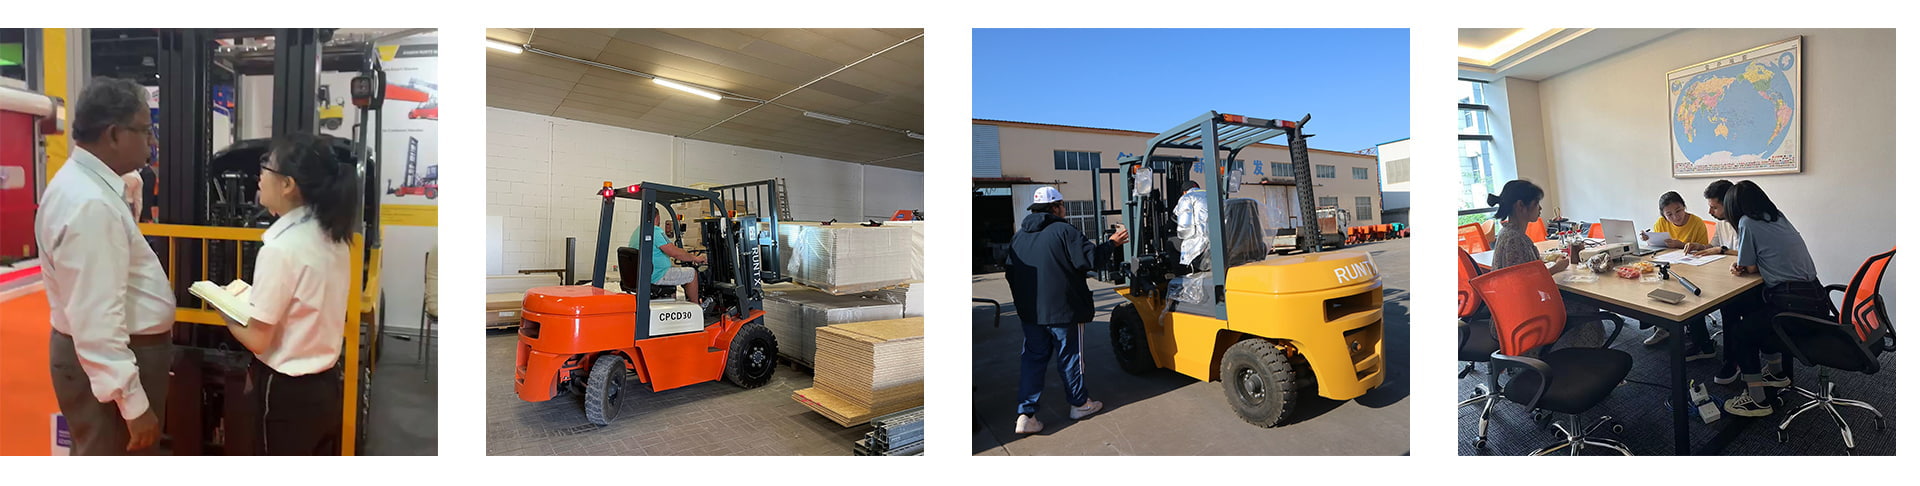 Runtx forklift with our clients